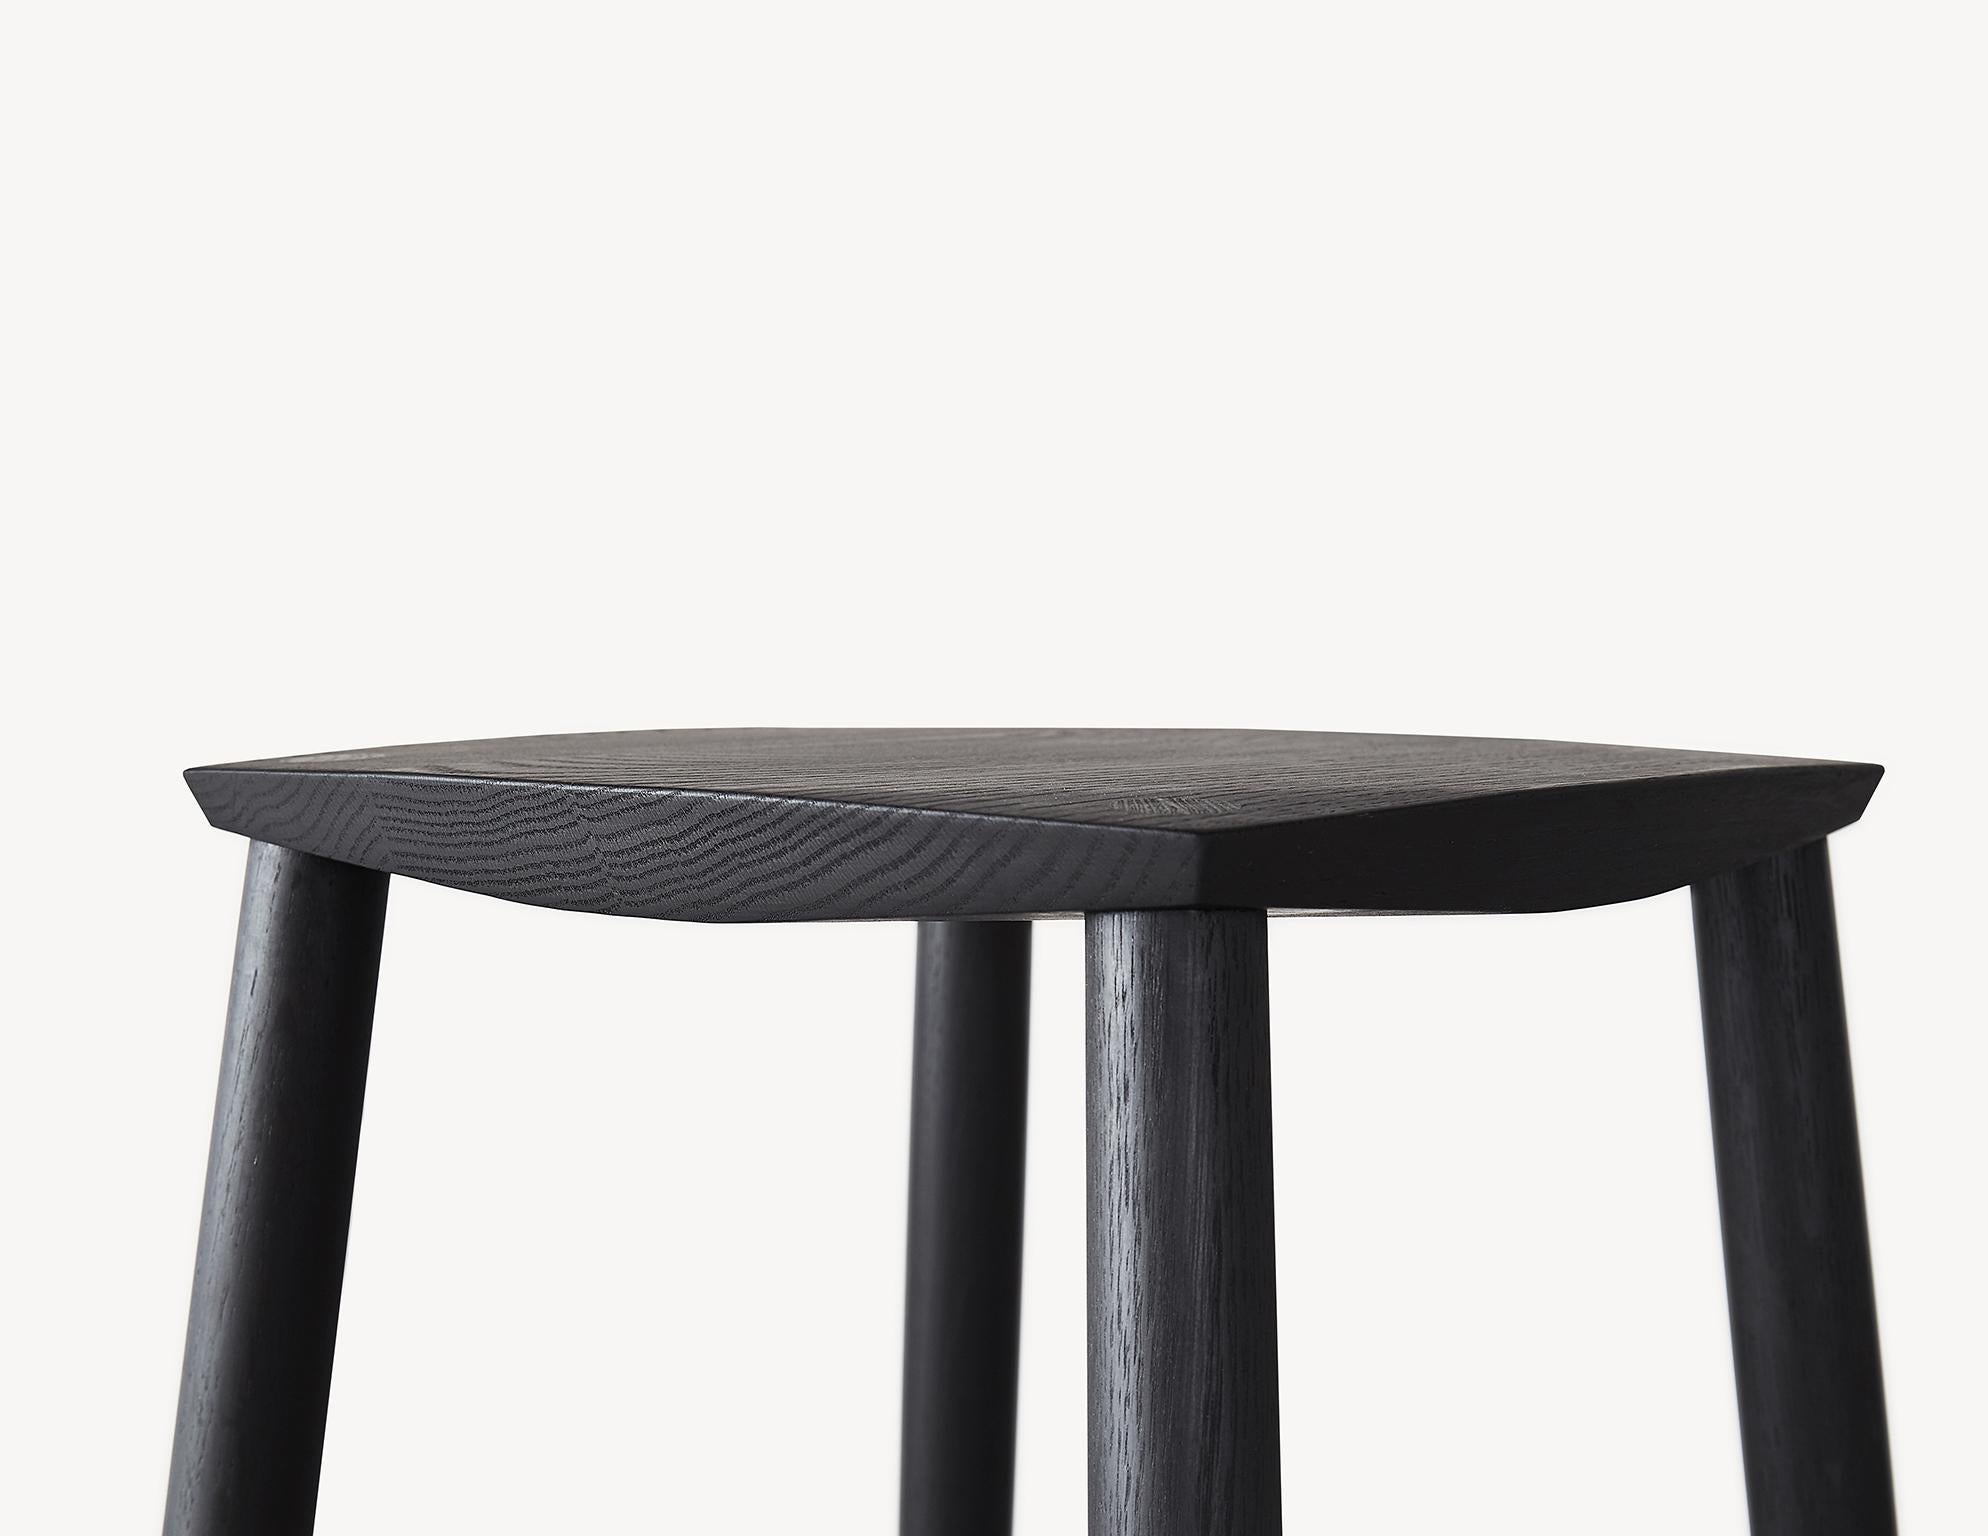 Canadian White Oak Minimalist Counter Stool by Coolican & Company